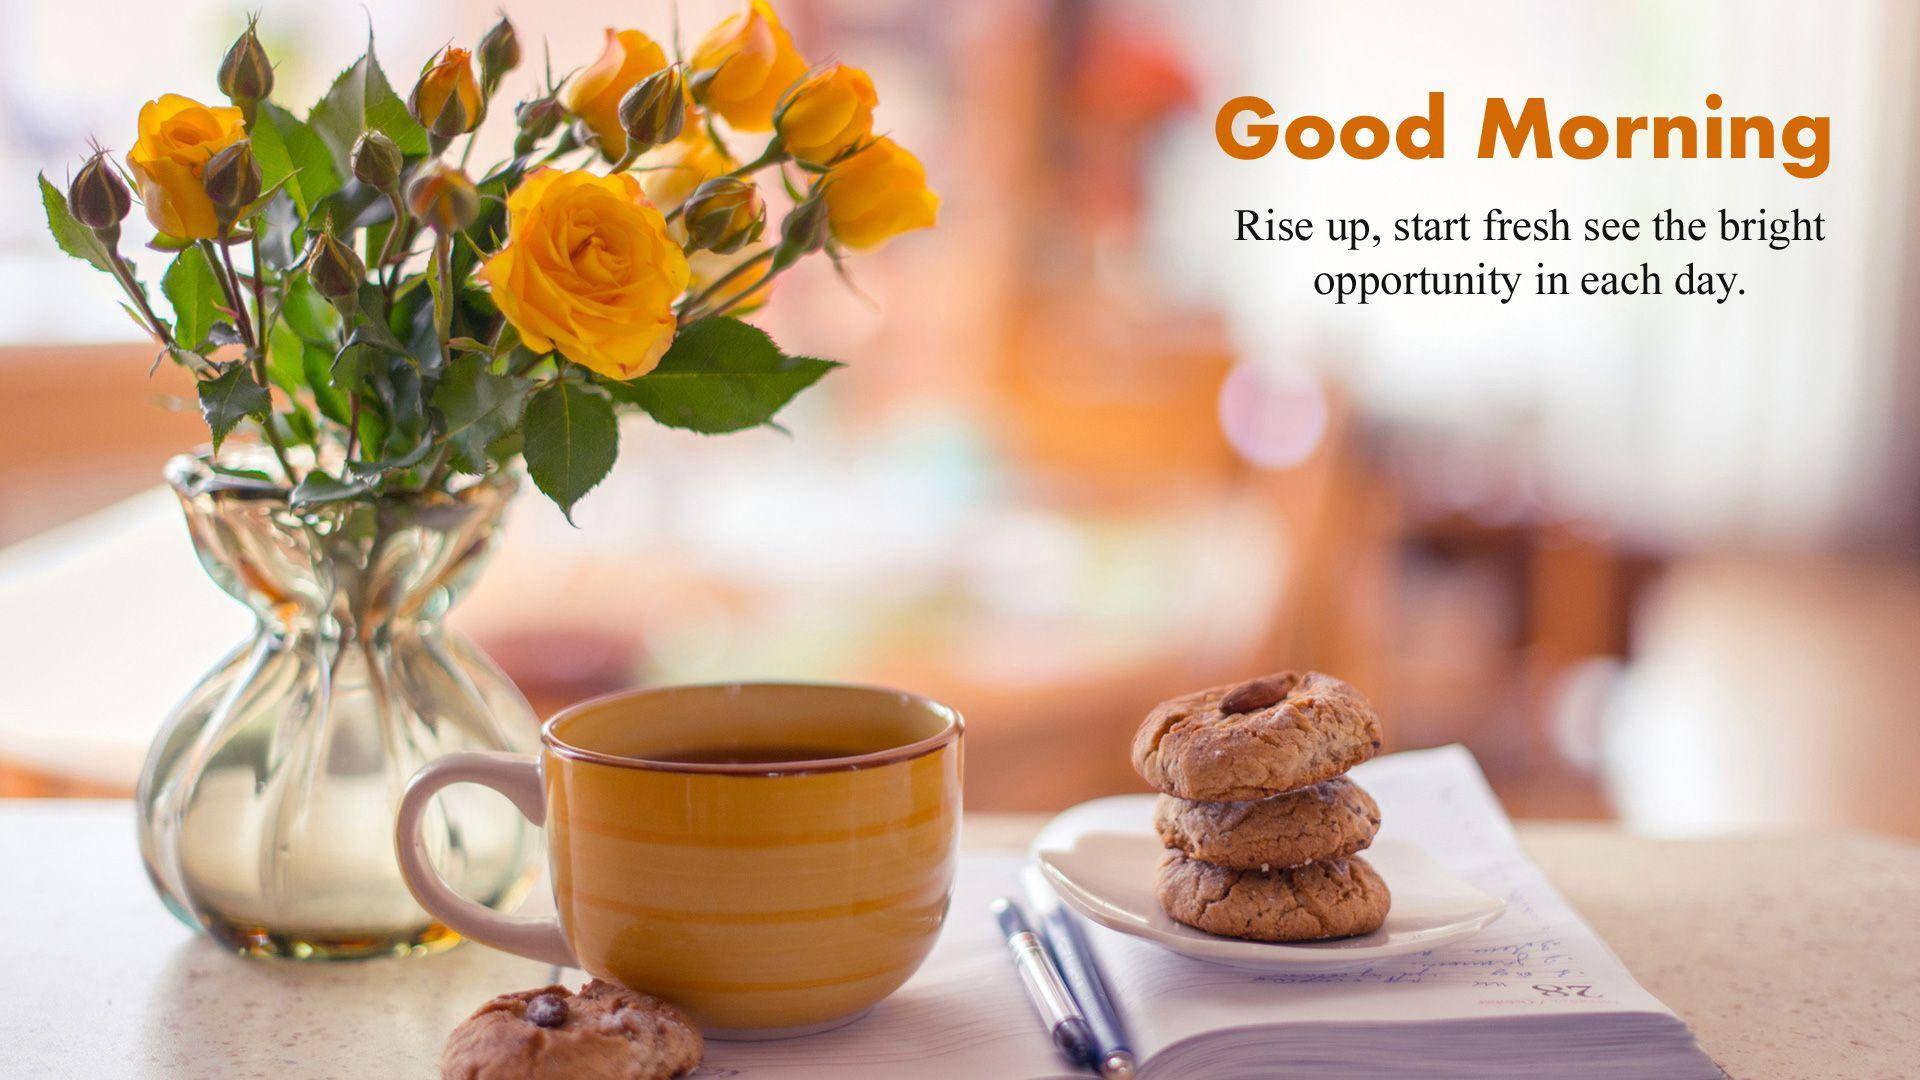 Good Morning Hd Flowers And Biscuits Background